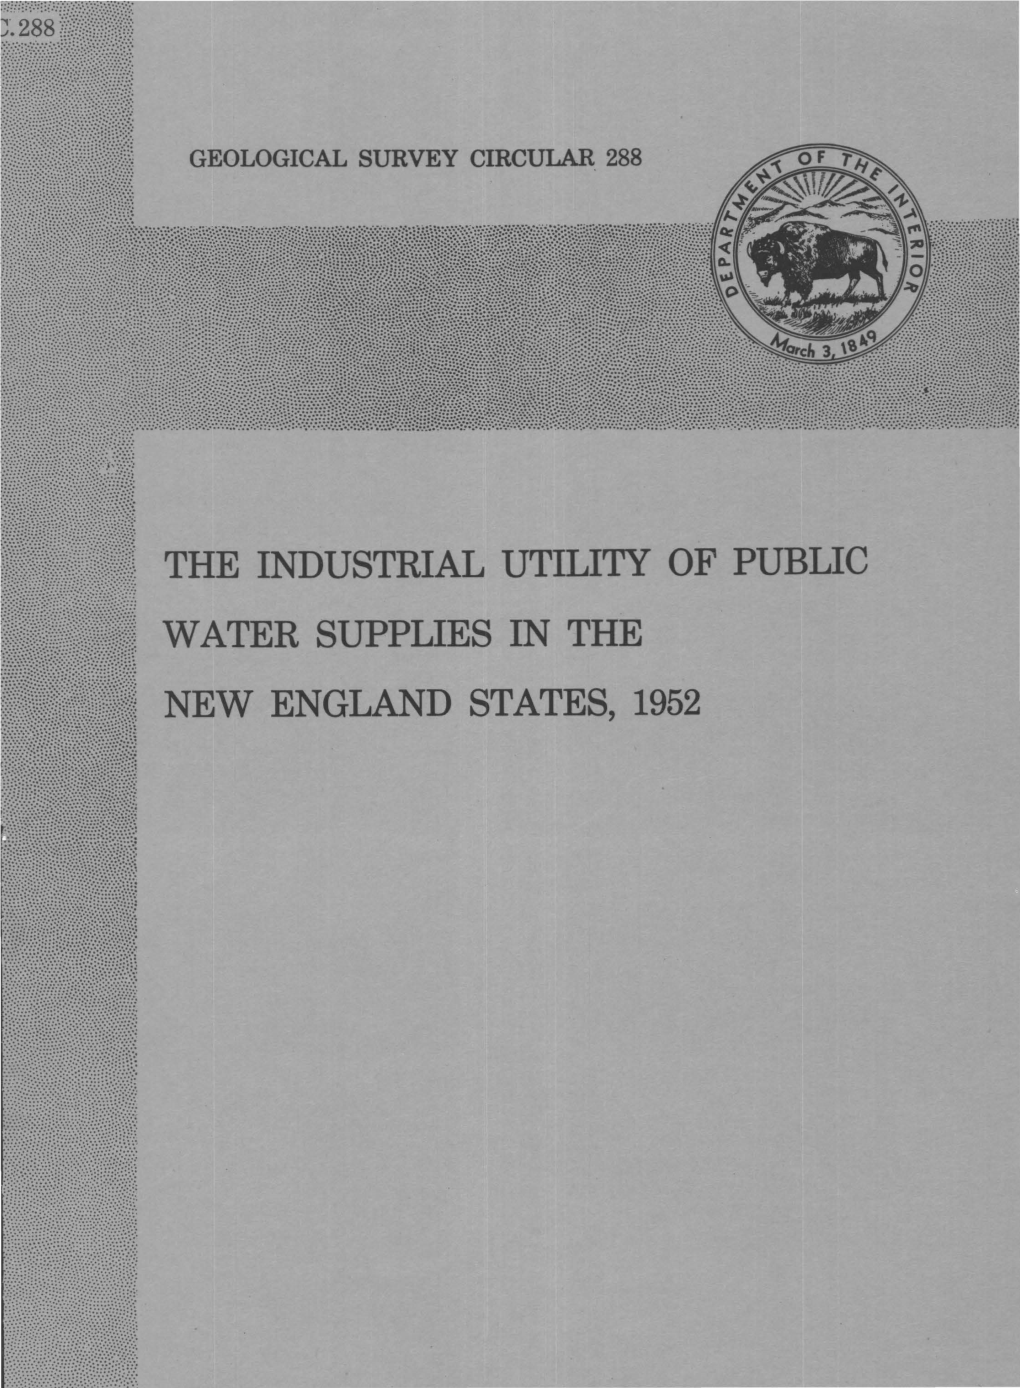 The Industrial Utility of Public Water Supplies in the New England States, 1952